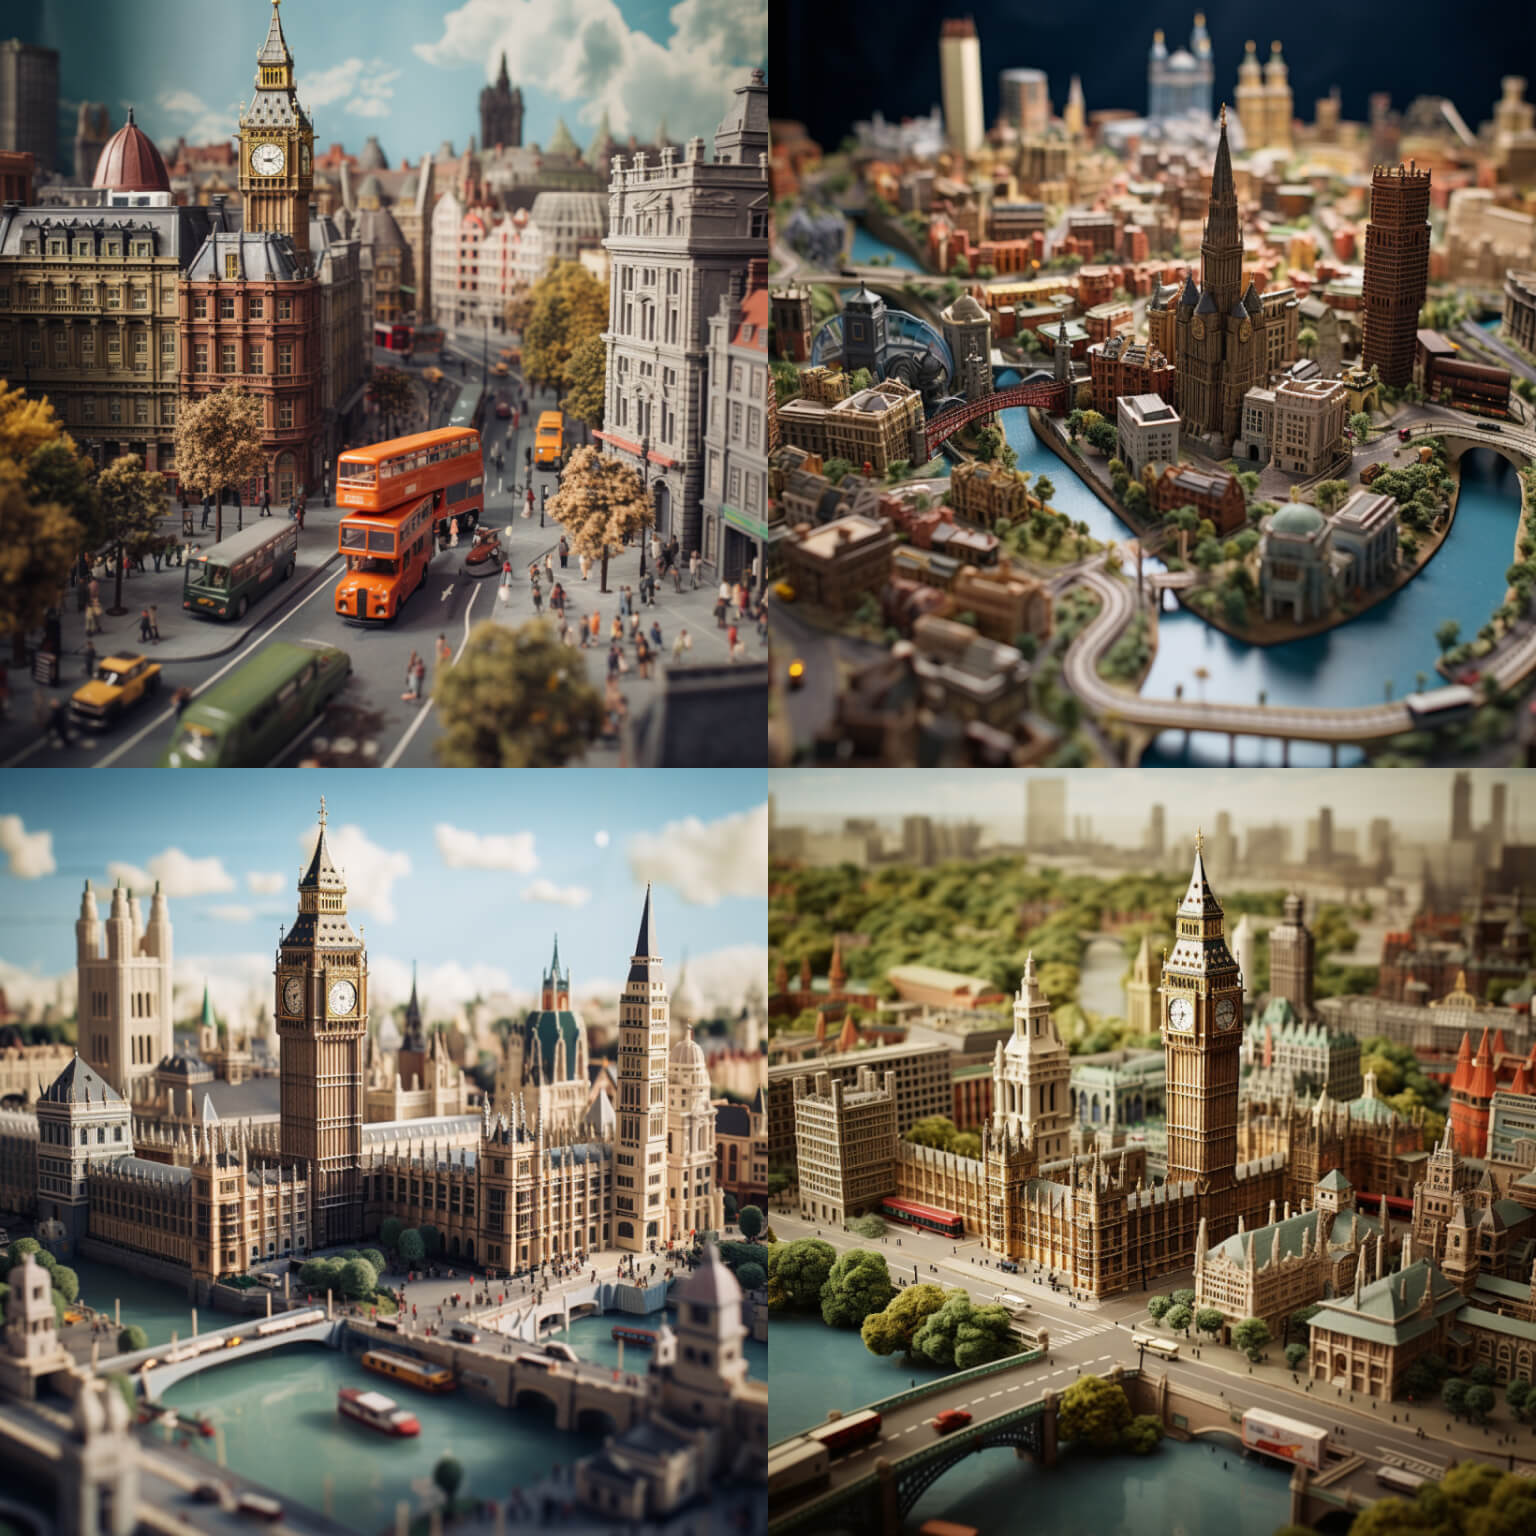 Image of London, in the style of miniature faking, produced by Midjourney, using an aspect ratio 1:1